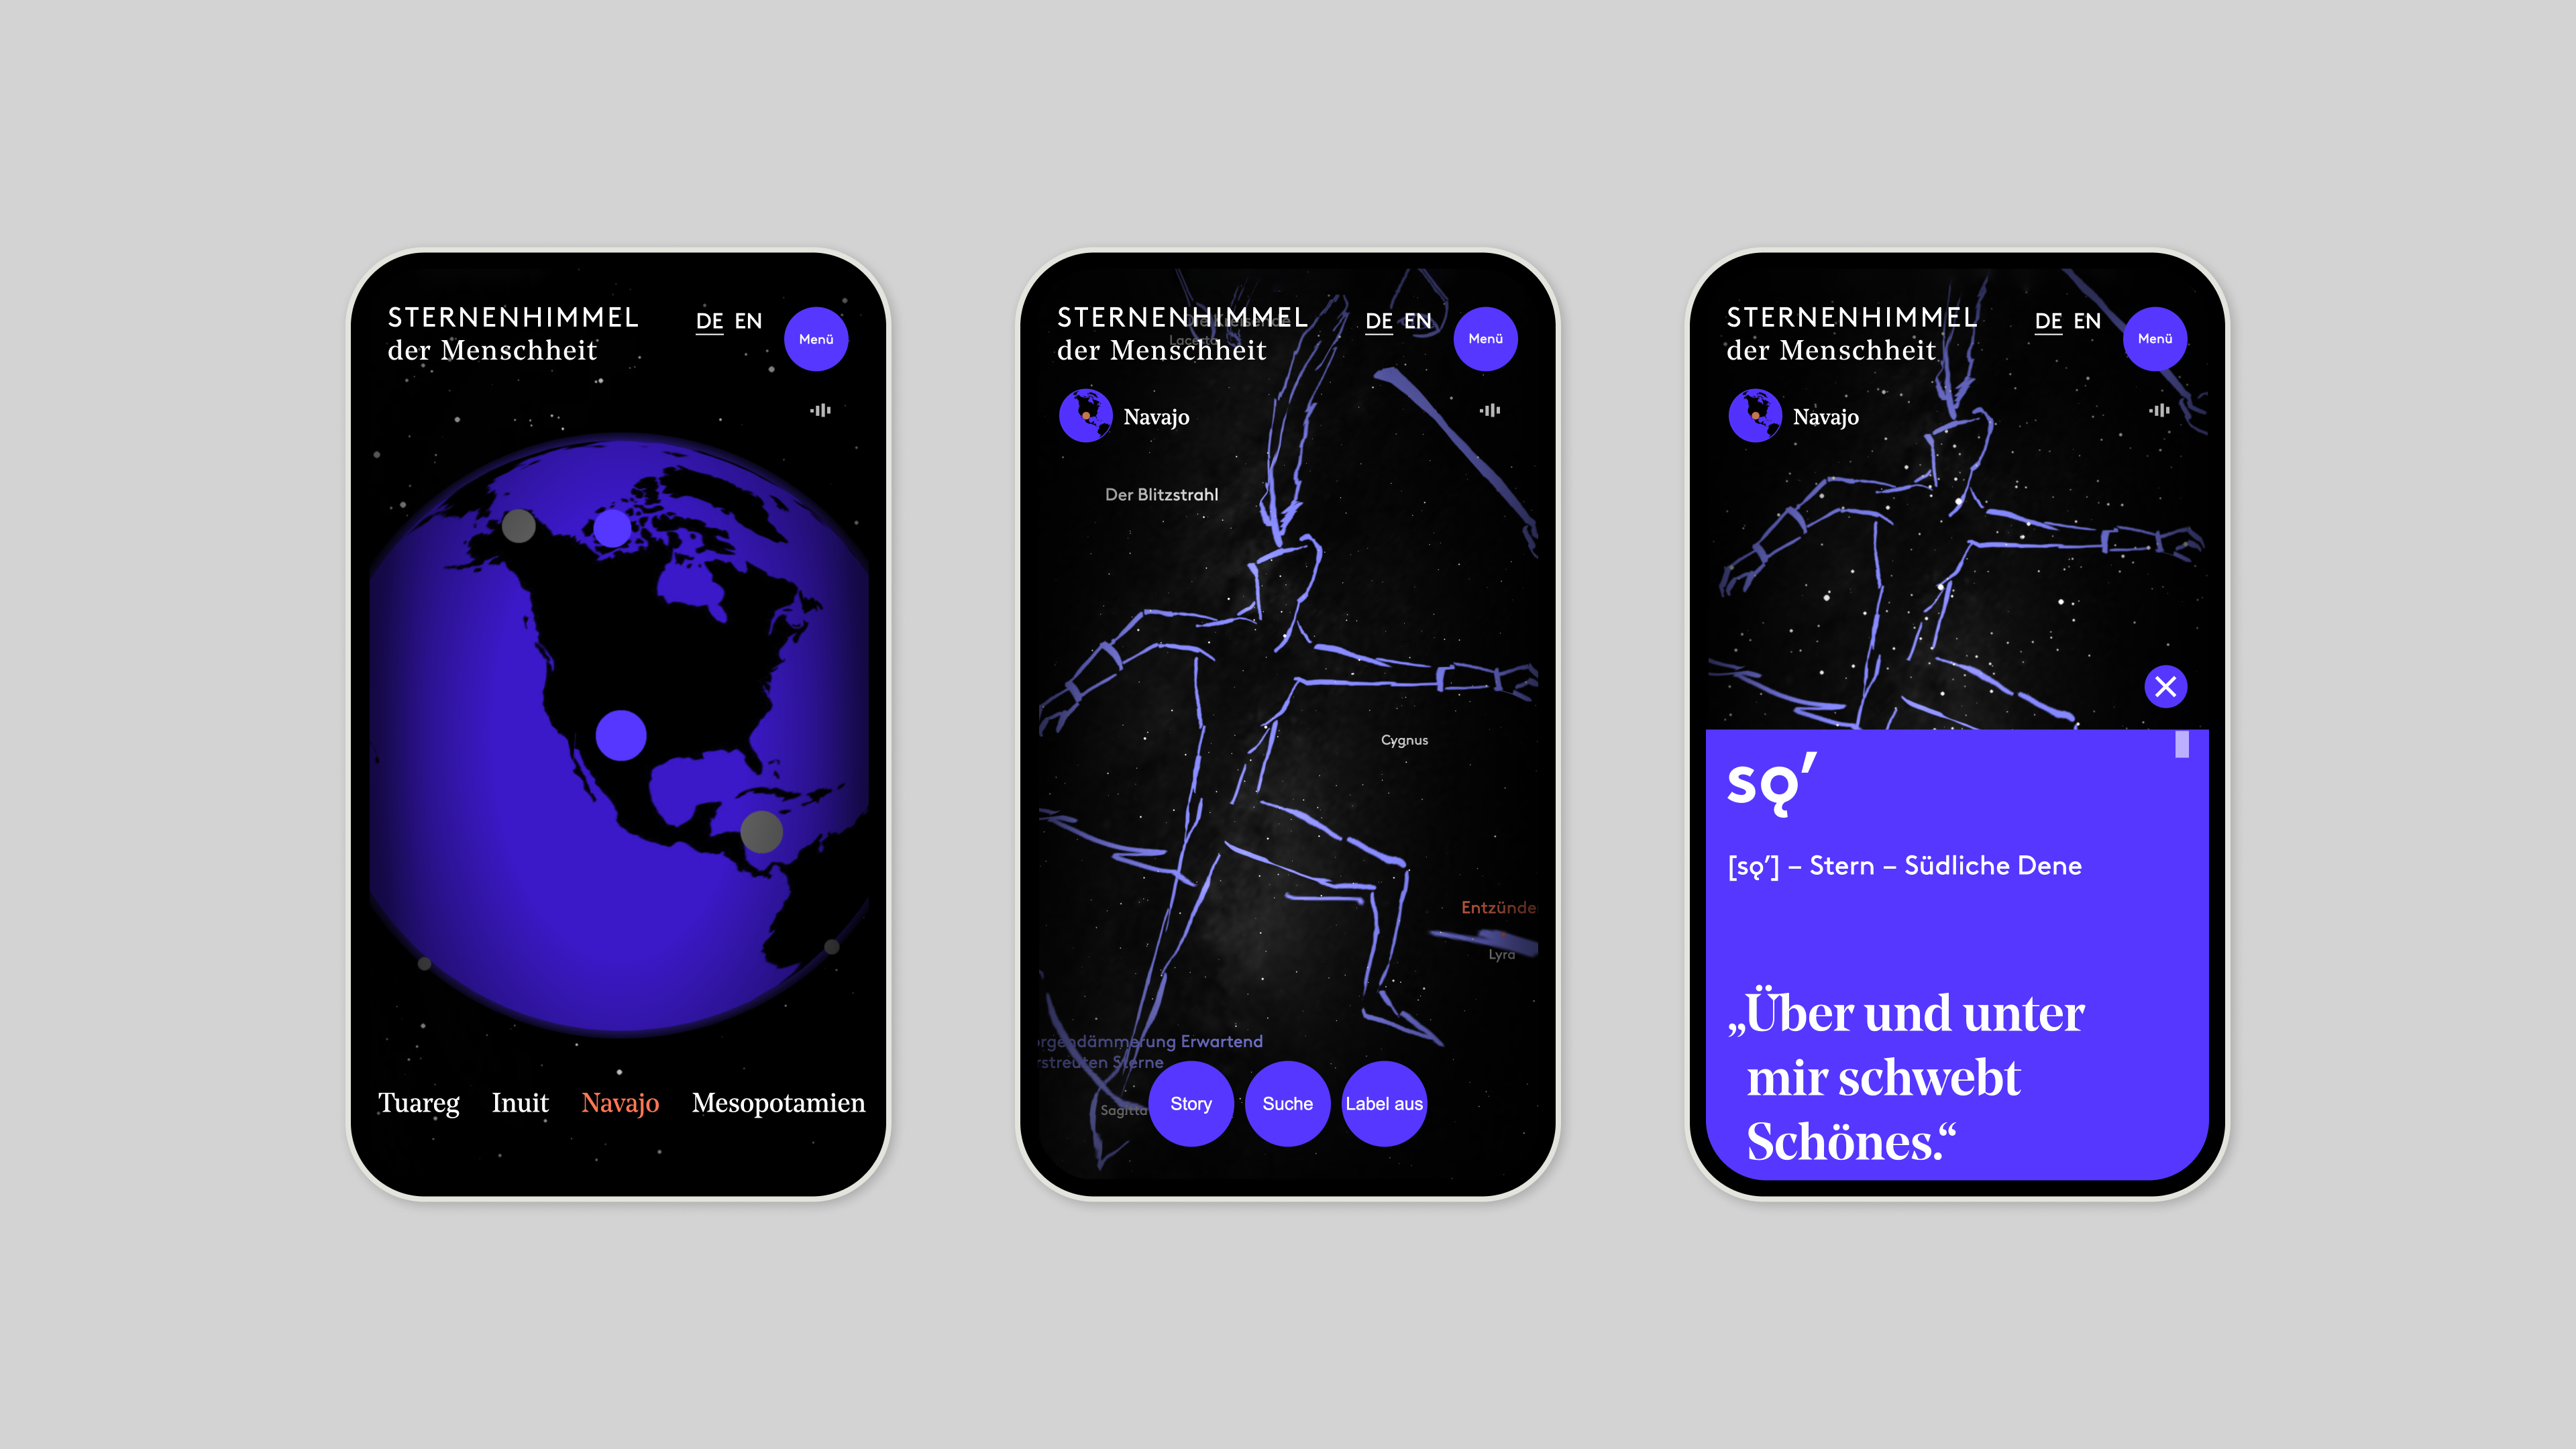 Smartphone screens showing how to navigate through the constellations of a culture. First by clicking on a 3D model of the earth, then seeing the 3D model of constellations and then reading the explanatory text.